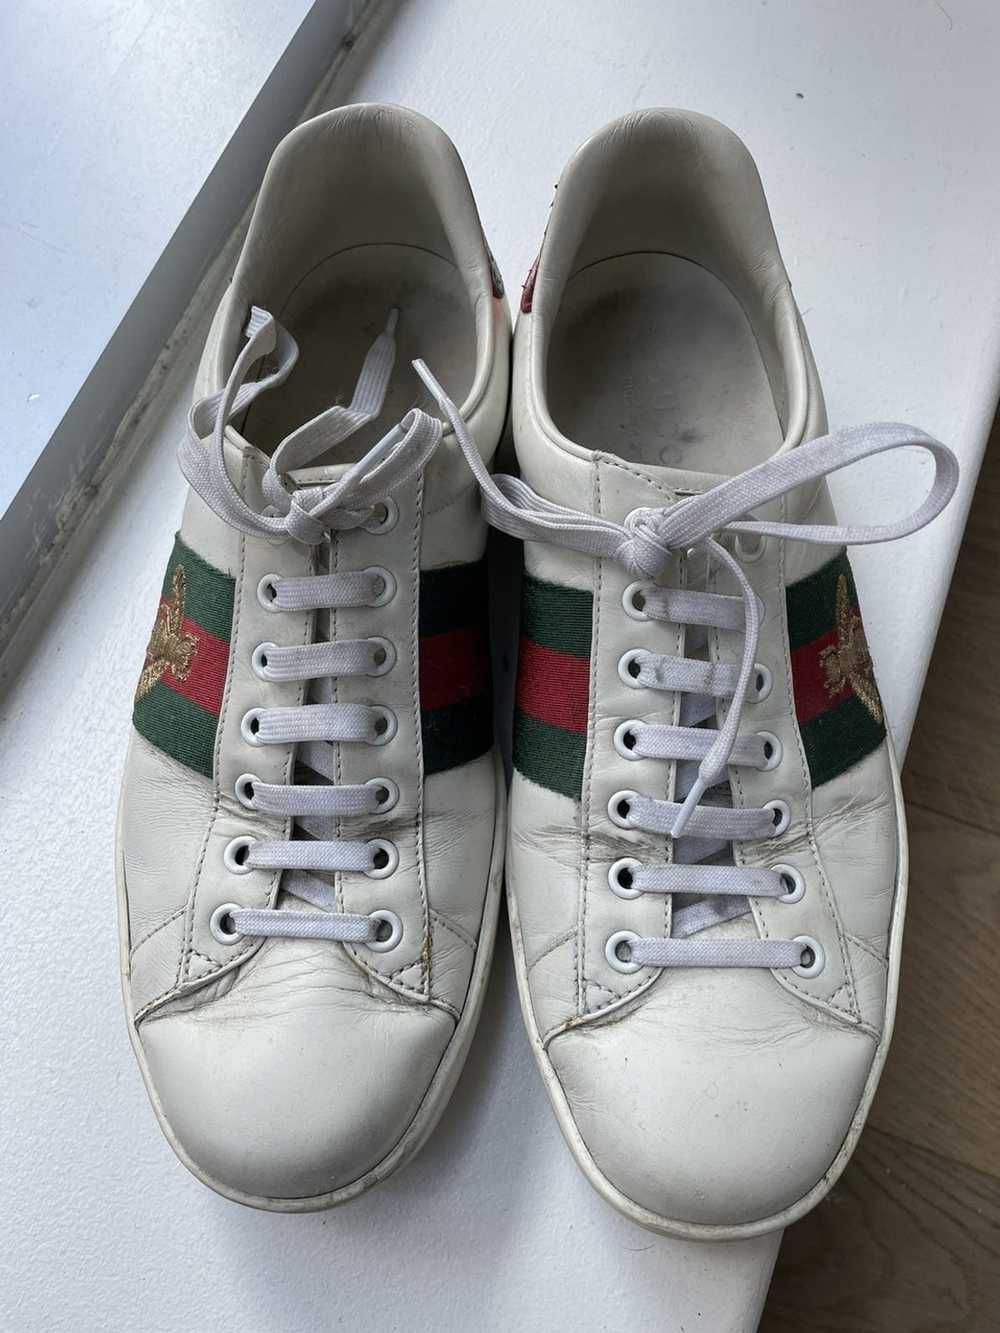 Gucci Gucci Ace Sneakers - image 5